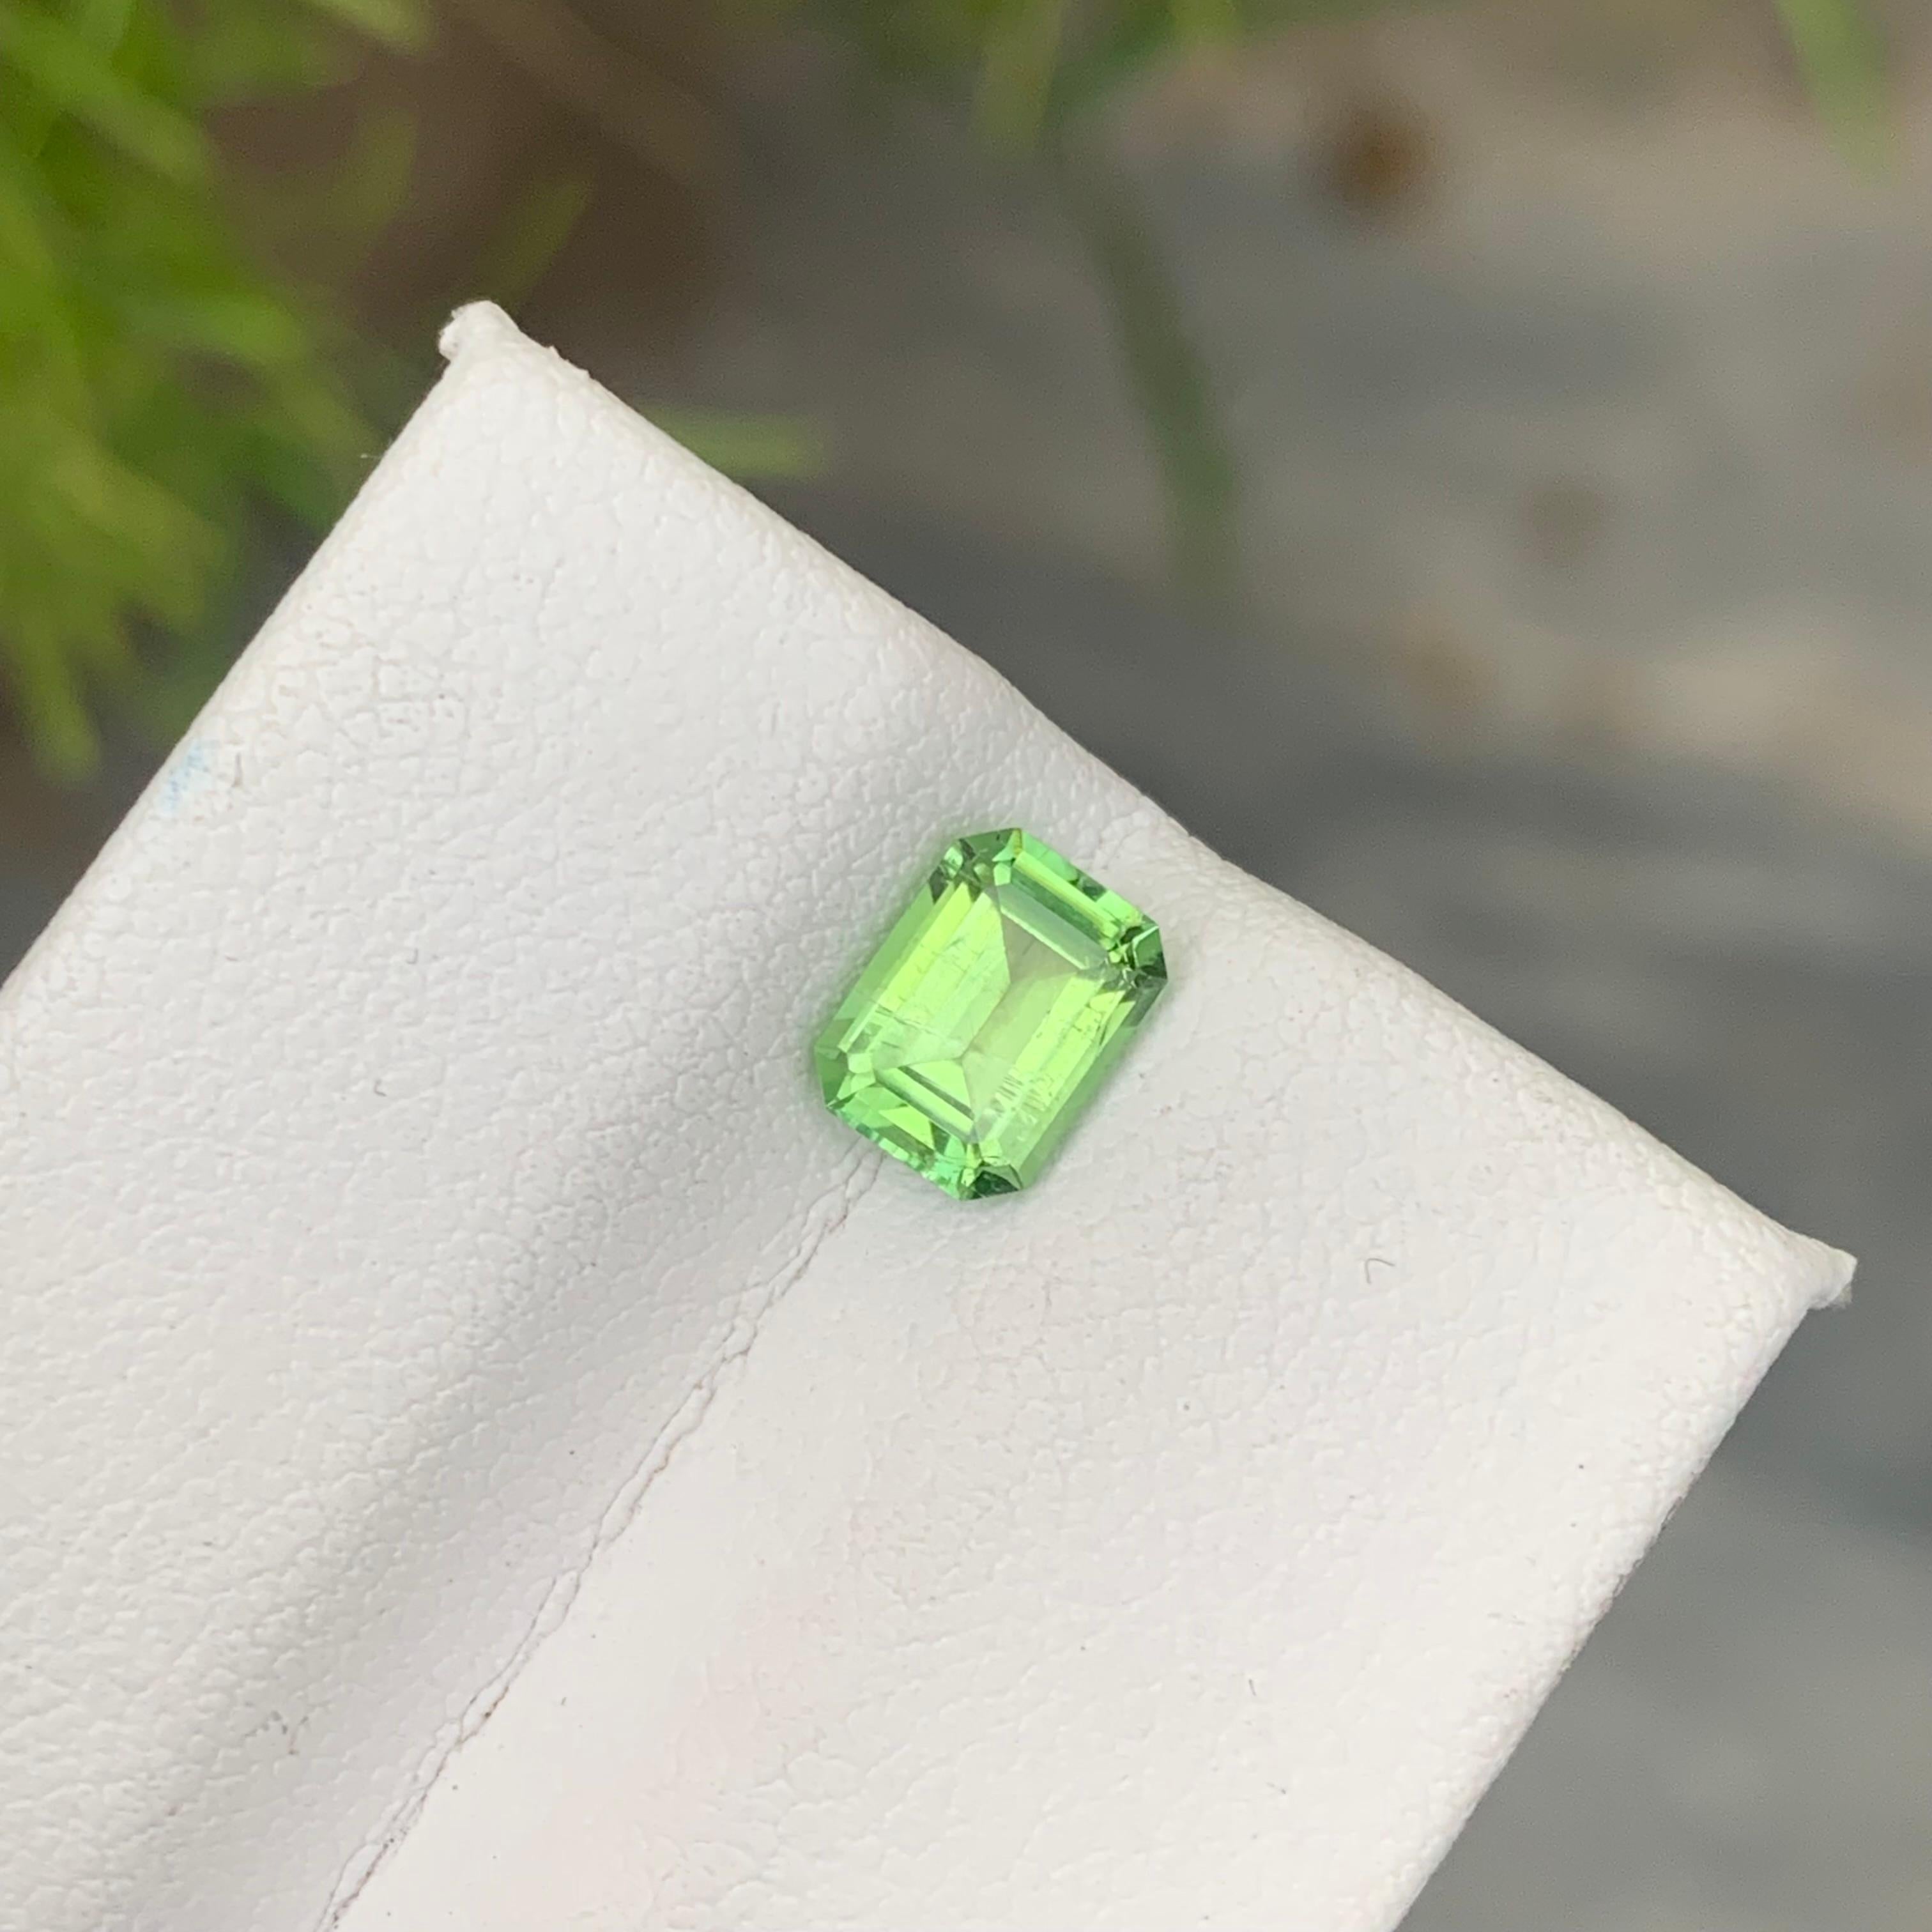 0.95 Carat Natural Loose Green Afghani Tourmaline Emerald Cut Gemstone for Ring For Sale 4